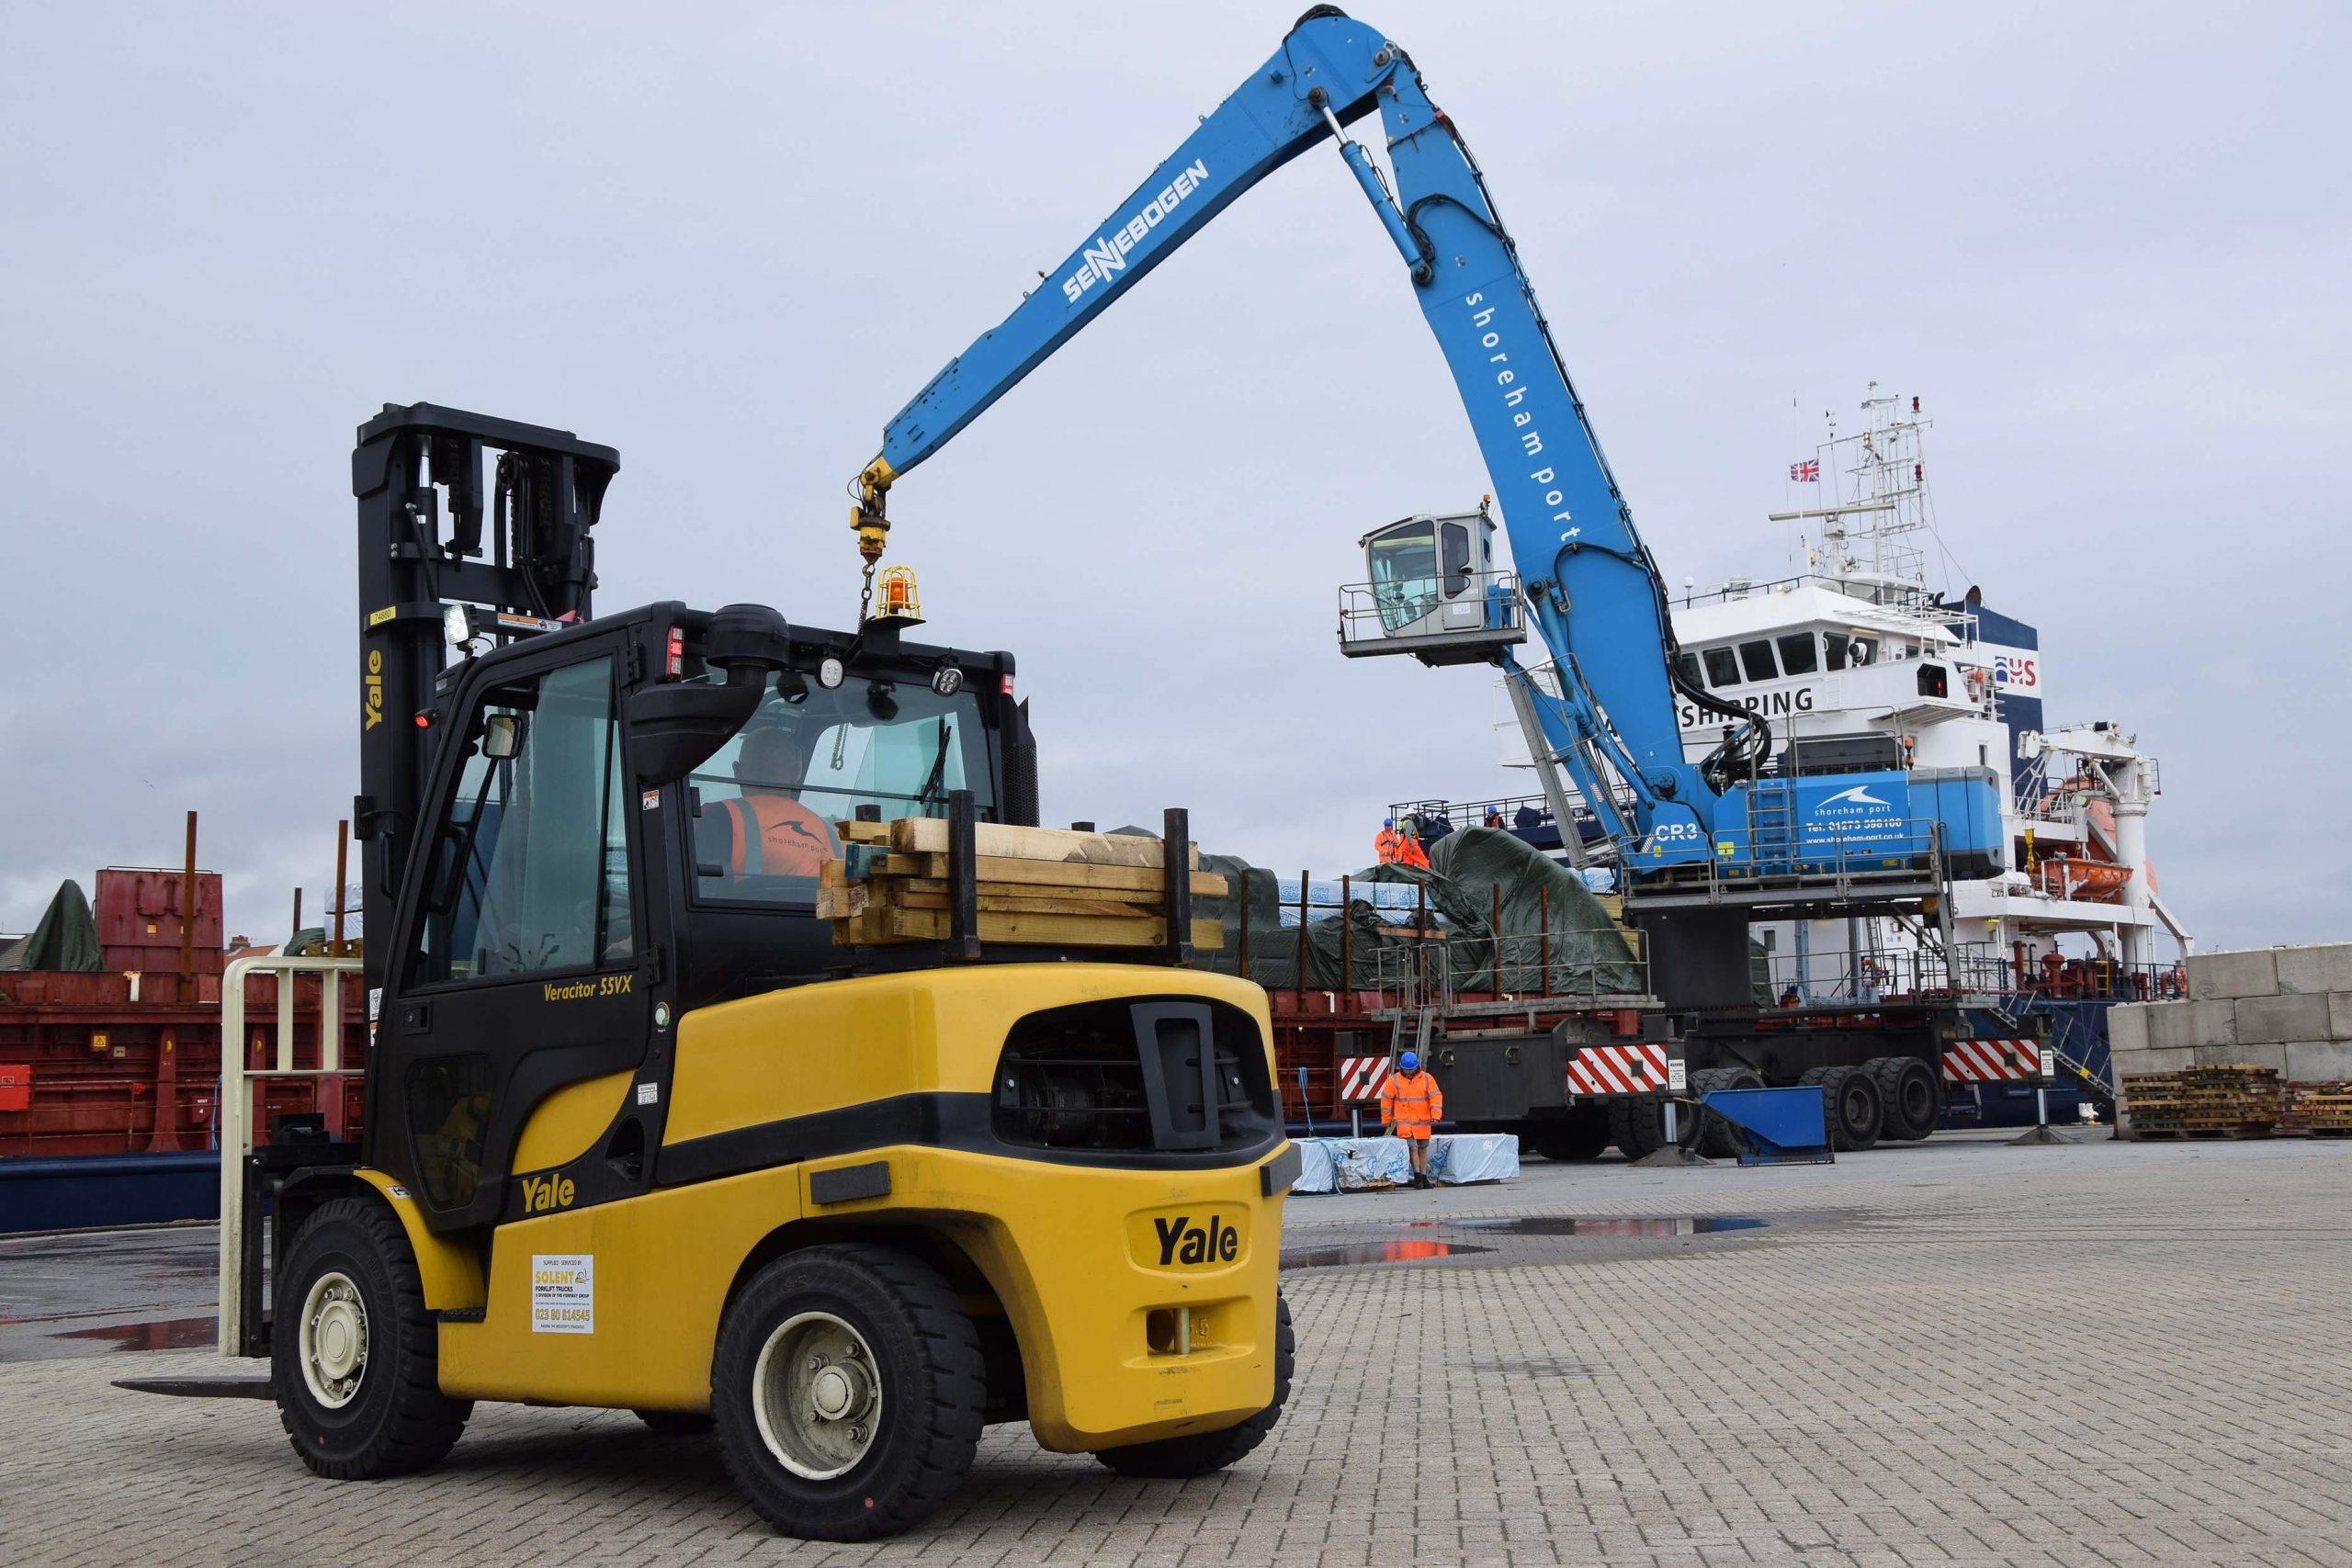 Shoreham Port Invests 2m In Uk Built Yale Lift Trucks From Forkway Group Manufacturing Production Engineering Magazine